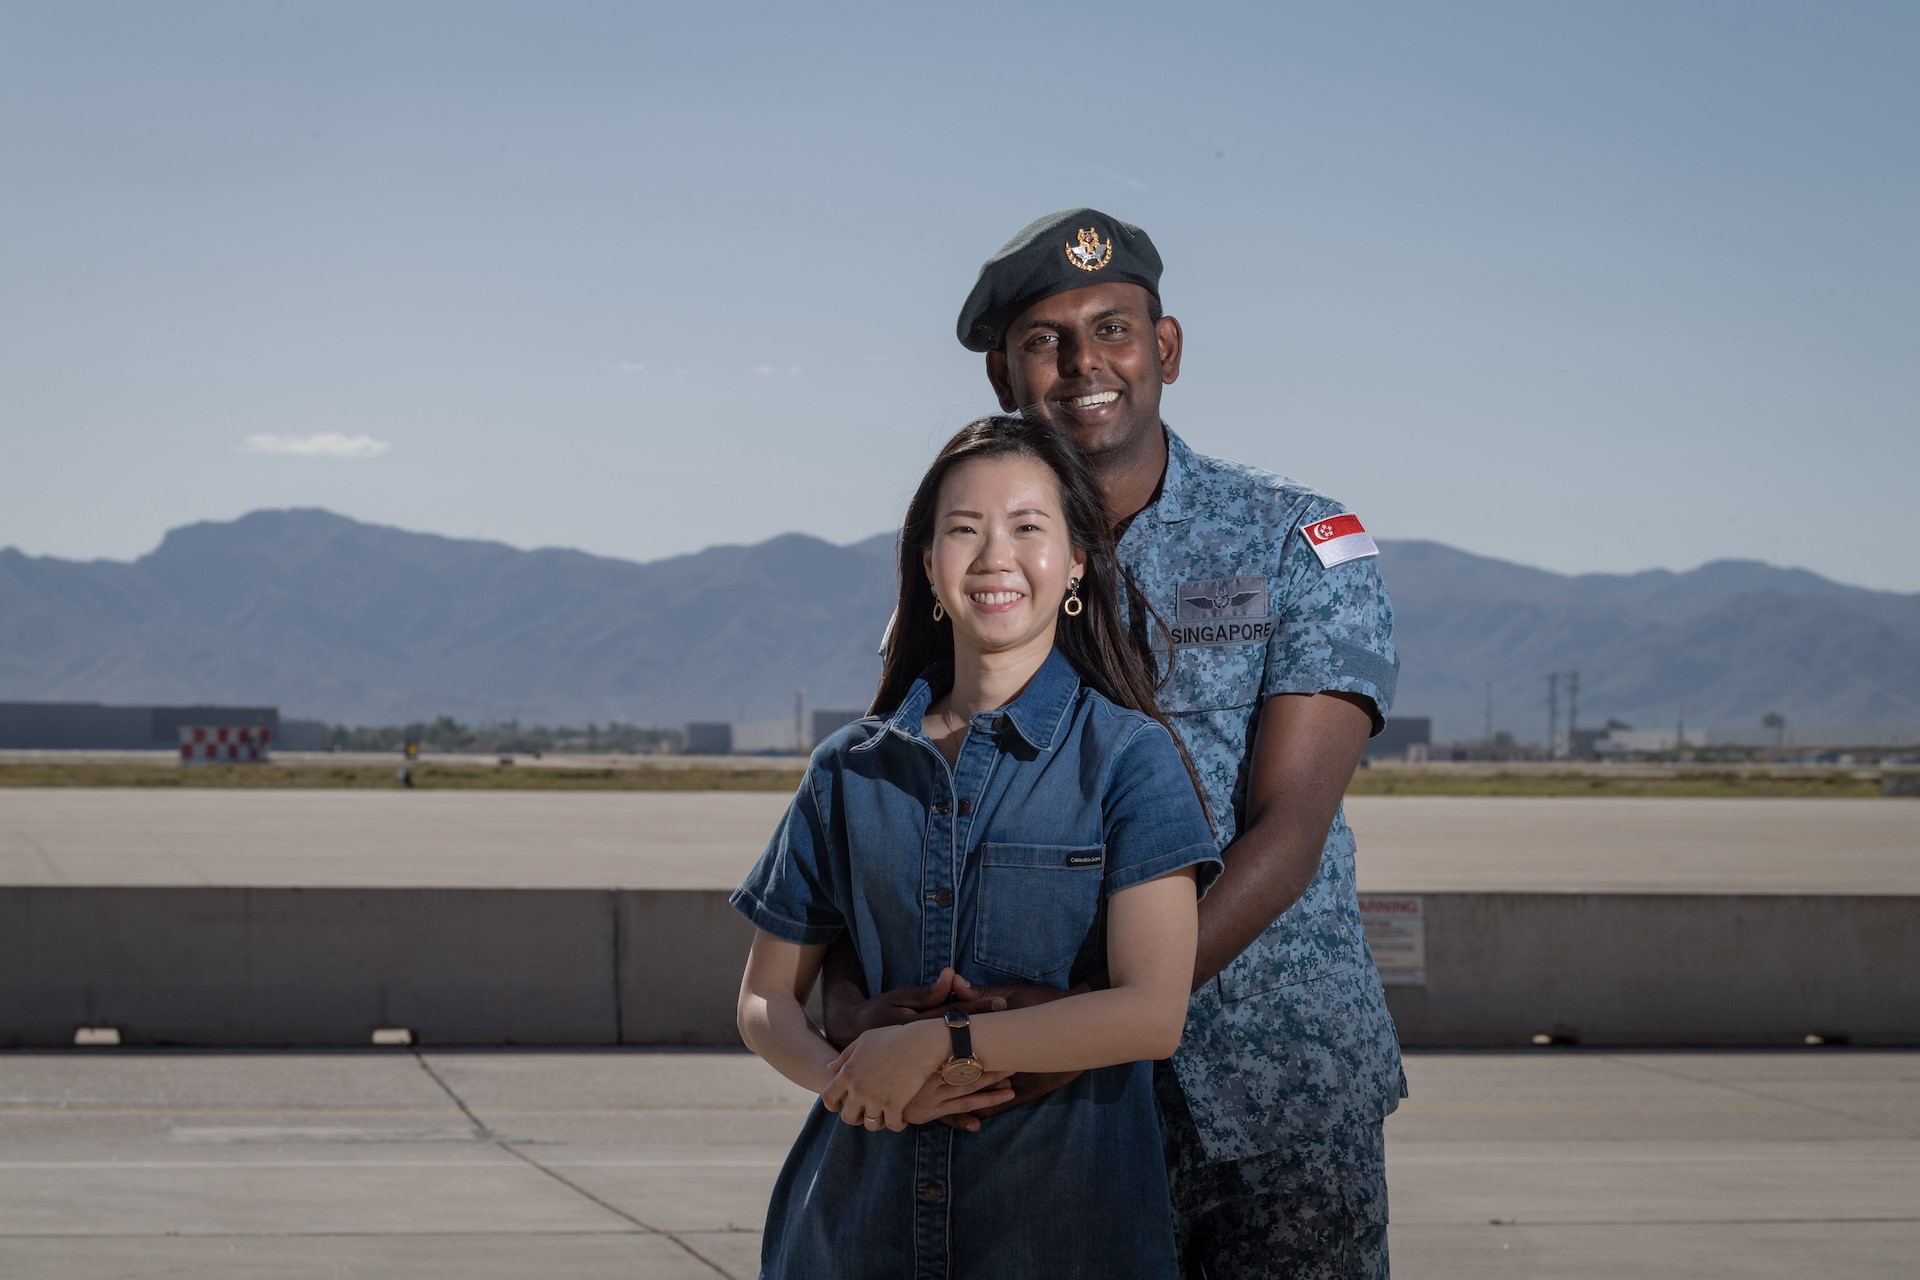 They found love while serving overseas